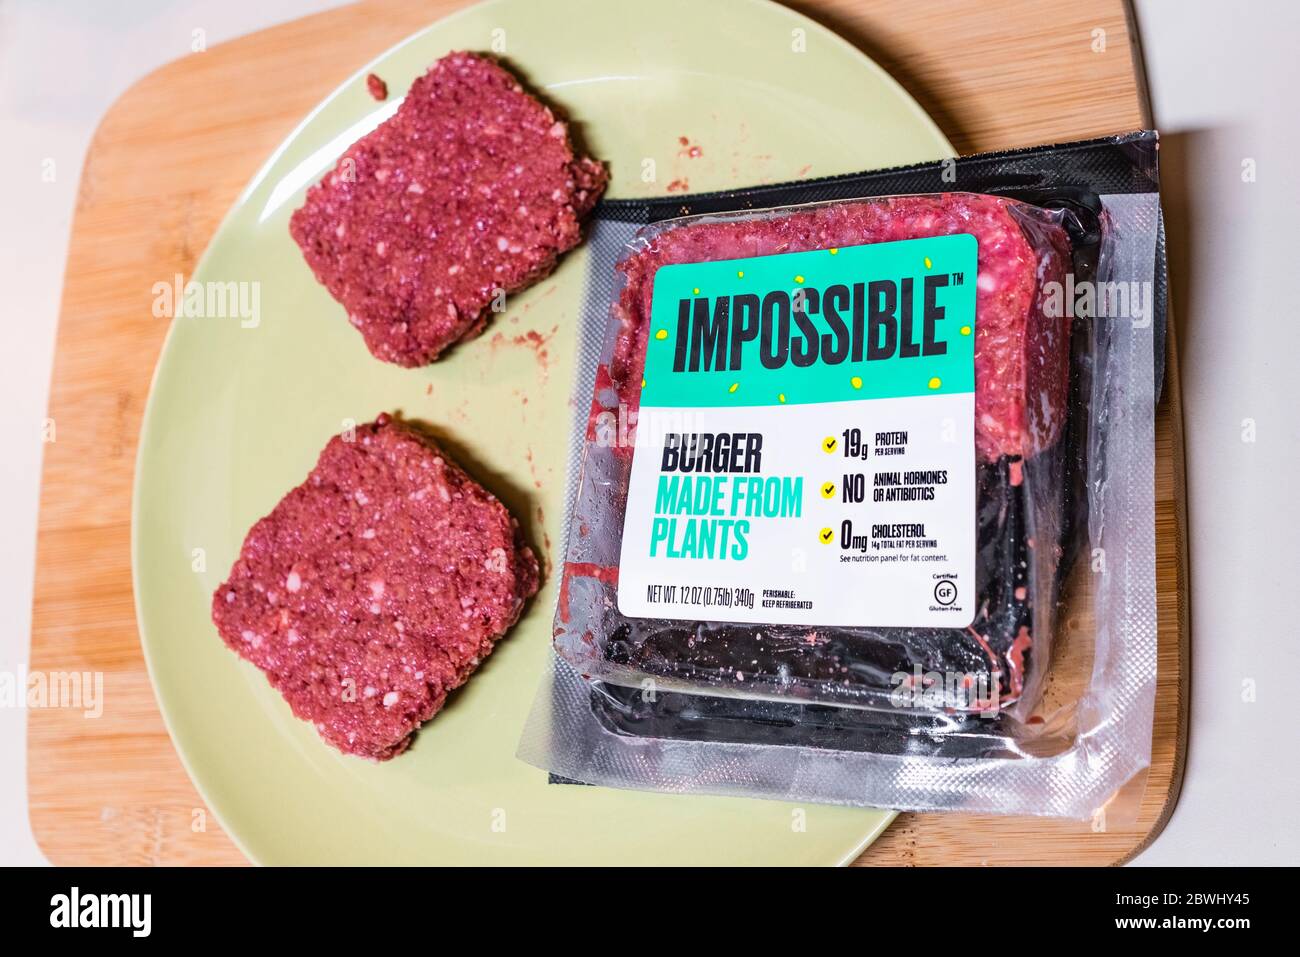 May 22, 2020 Sunnyvale / CA / USA - Impossible Burger patties and package on a plate; the Impossible Burger is produced by Impossible Foods Inc and is Stock Photo